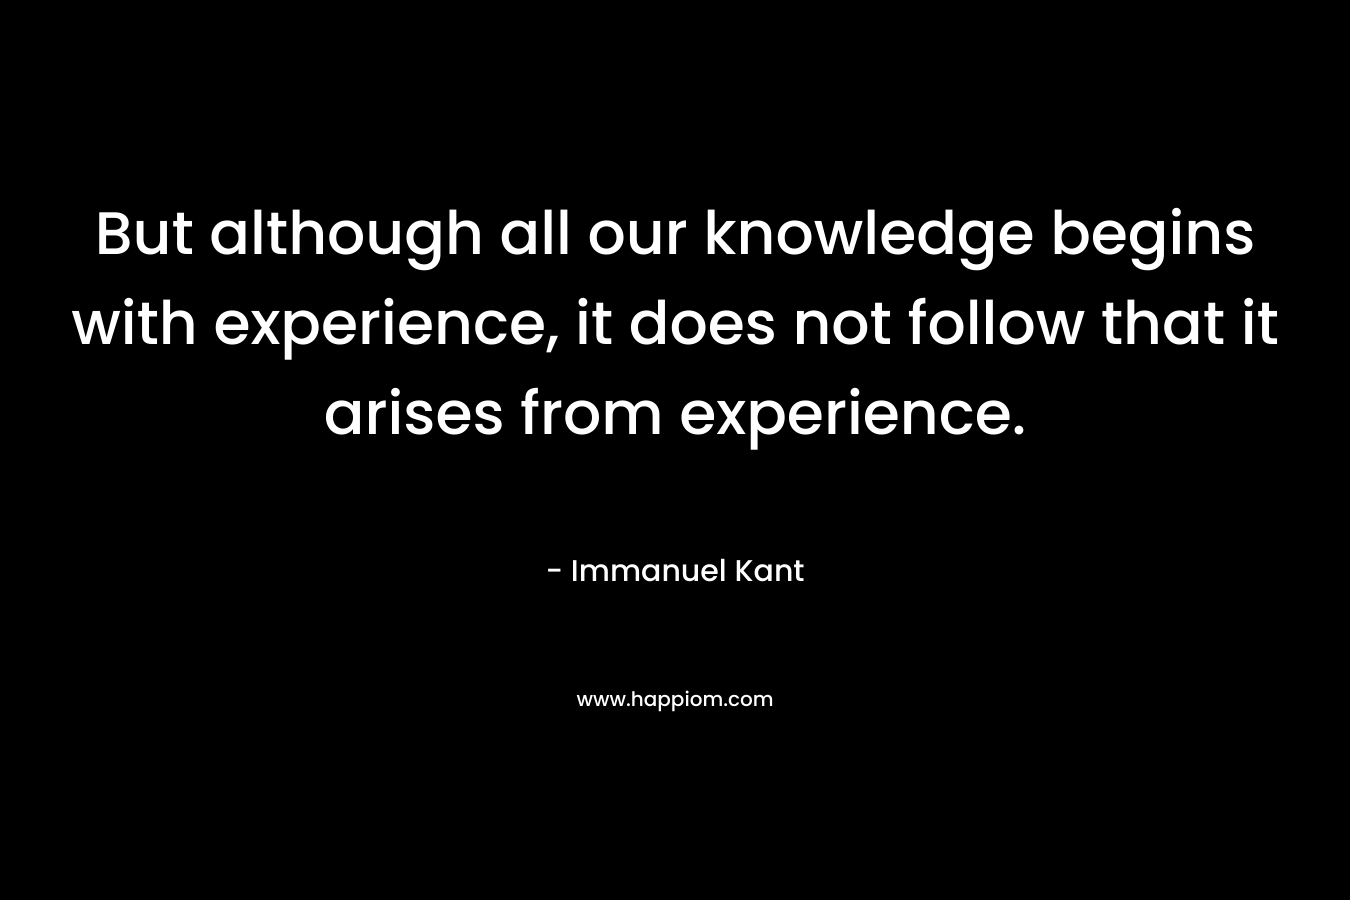 But although all our knowledge begins with experience, it does not follow that it arises from experience.